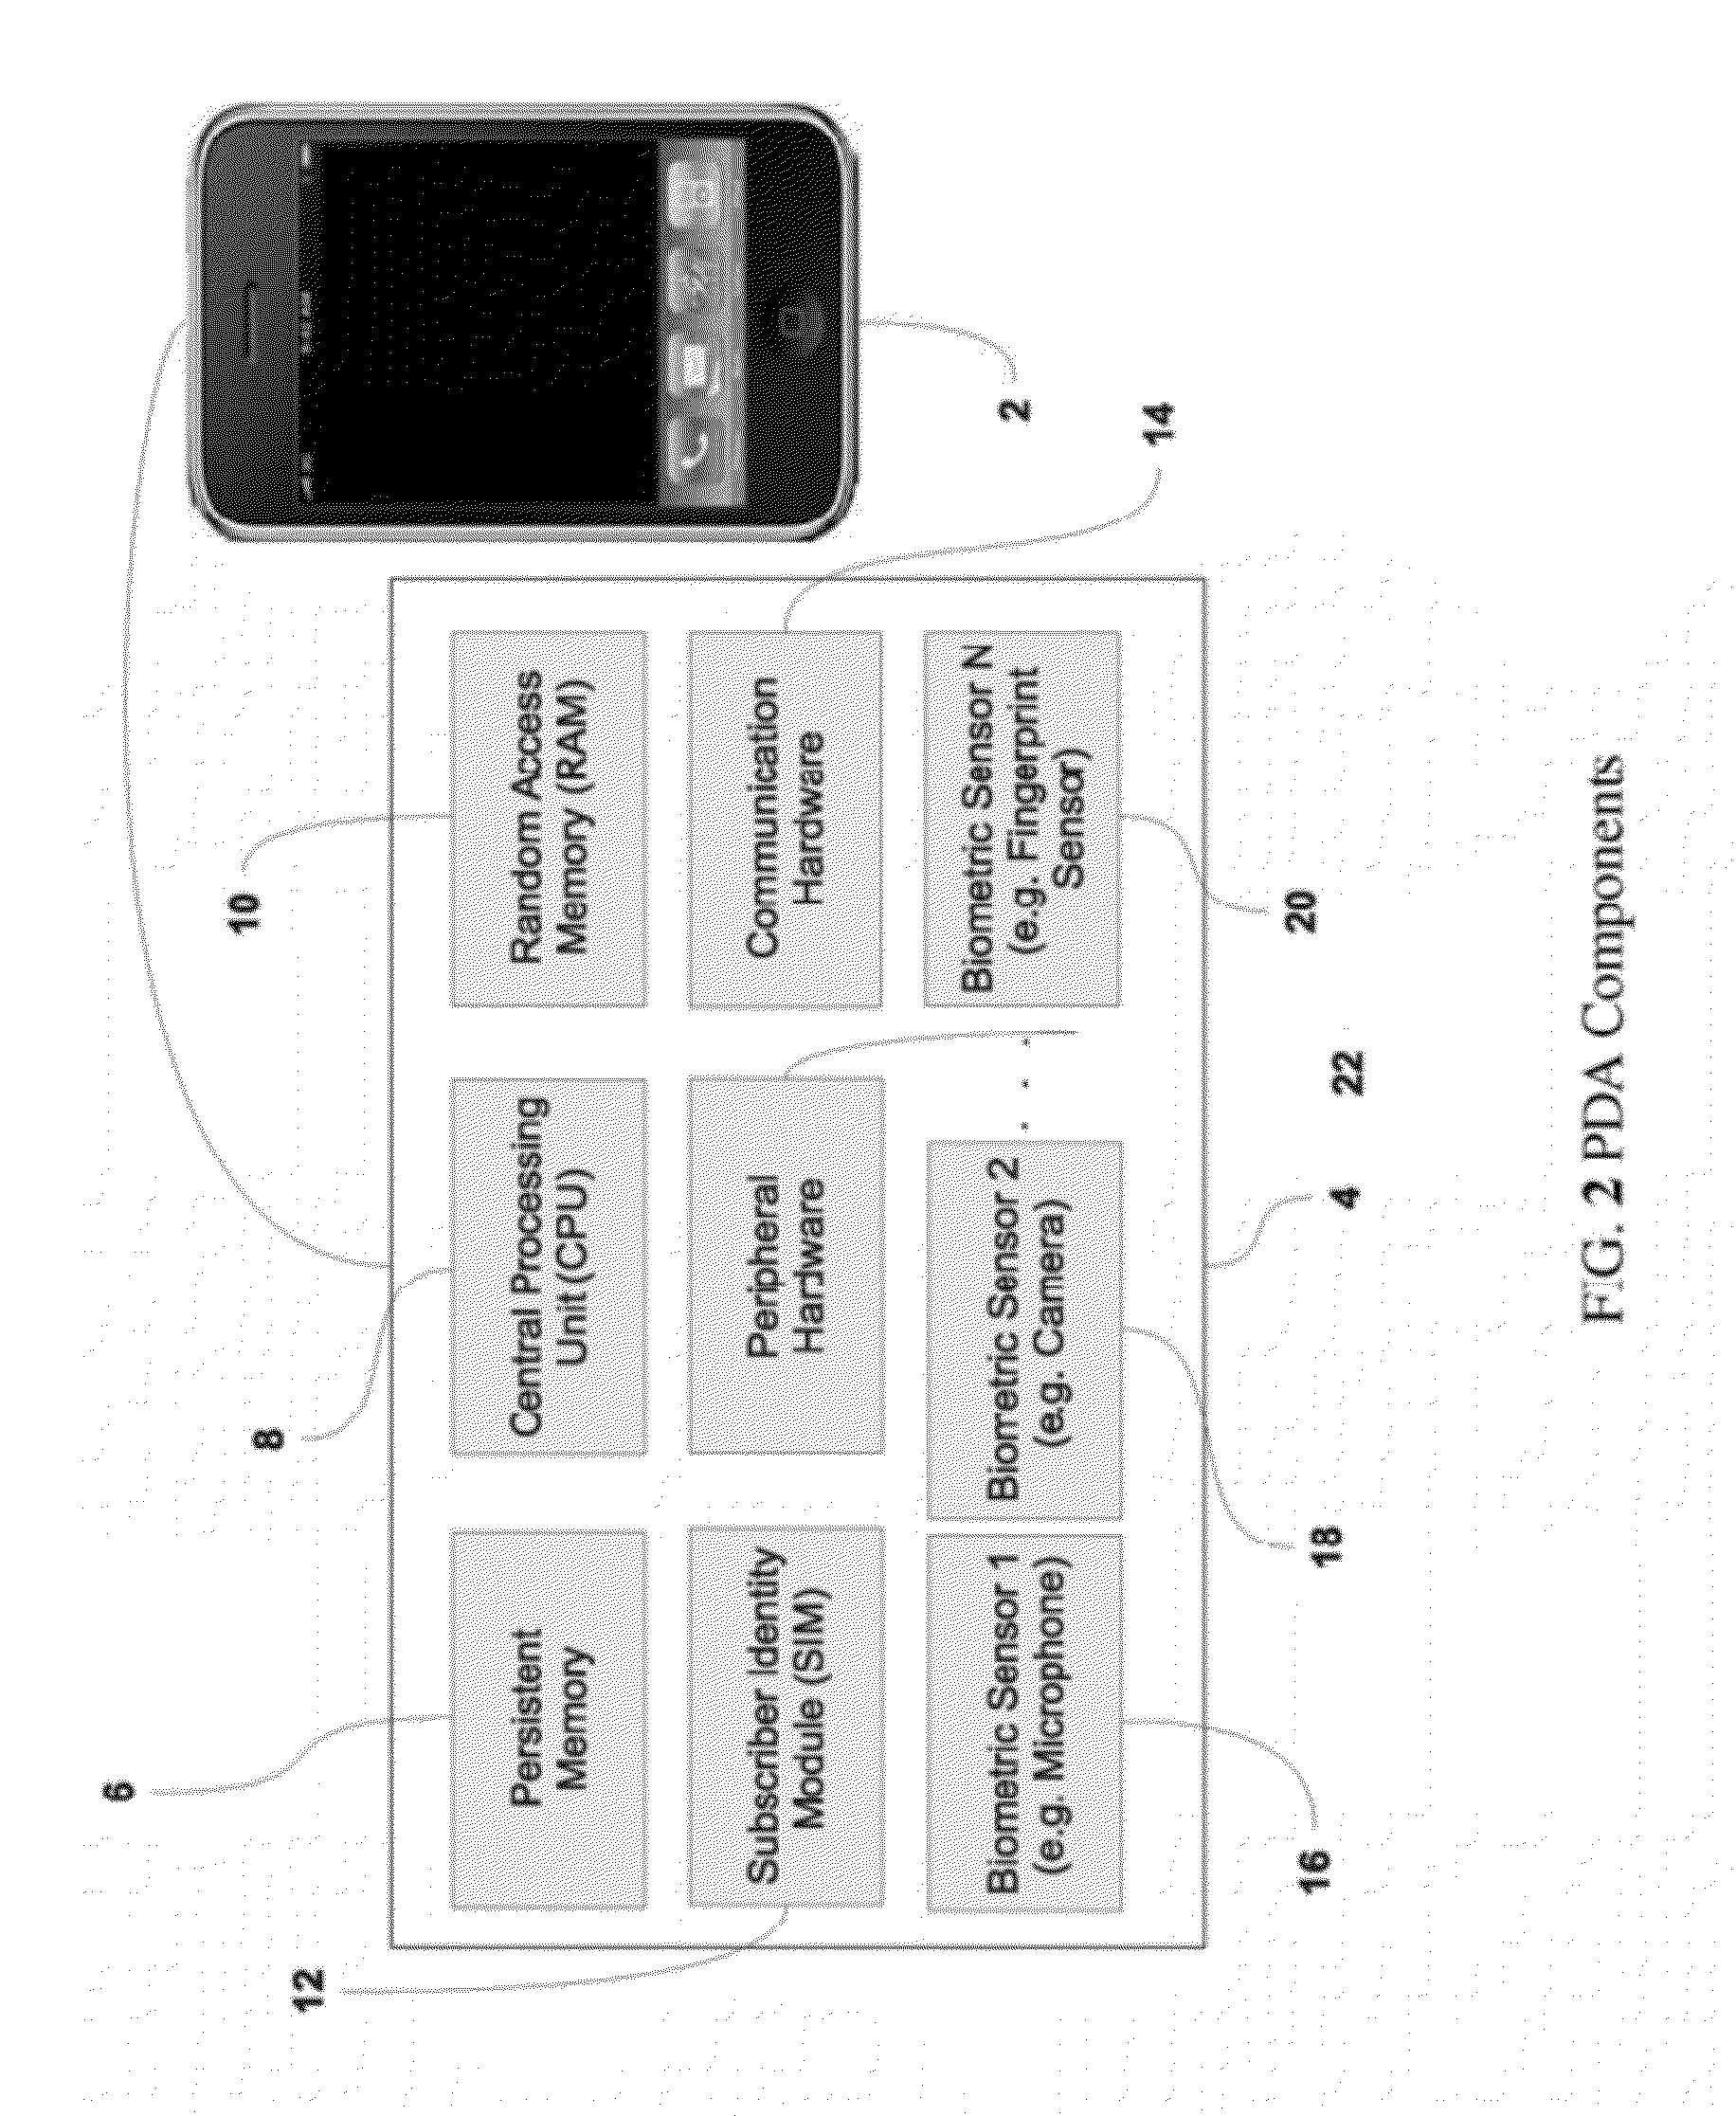 Mobile Device Transaction Using Multi-Factor Authentication